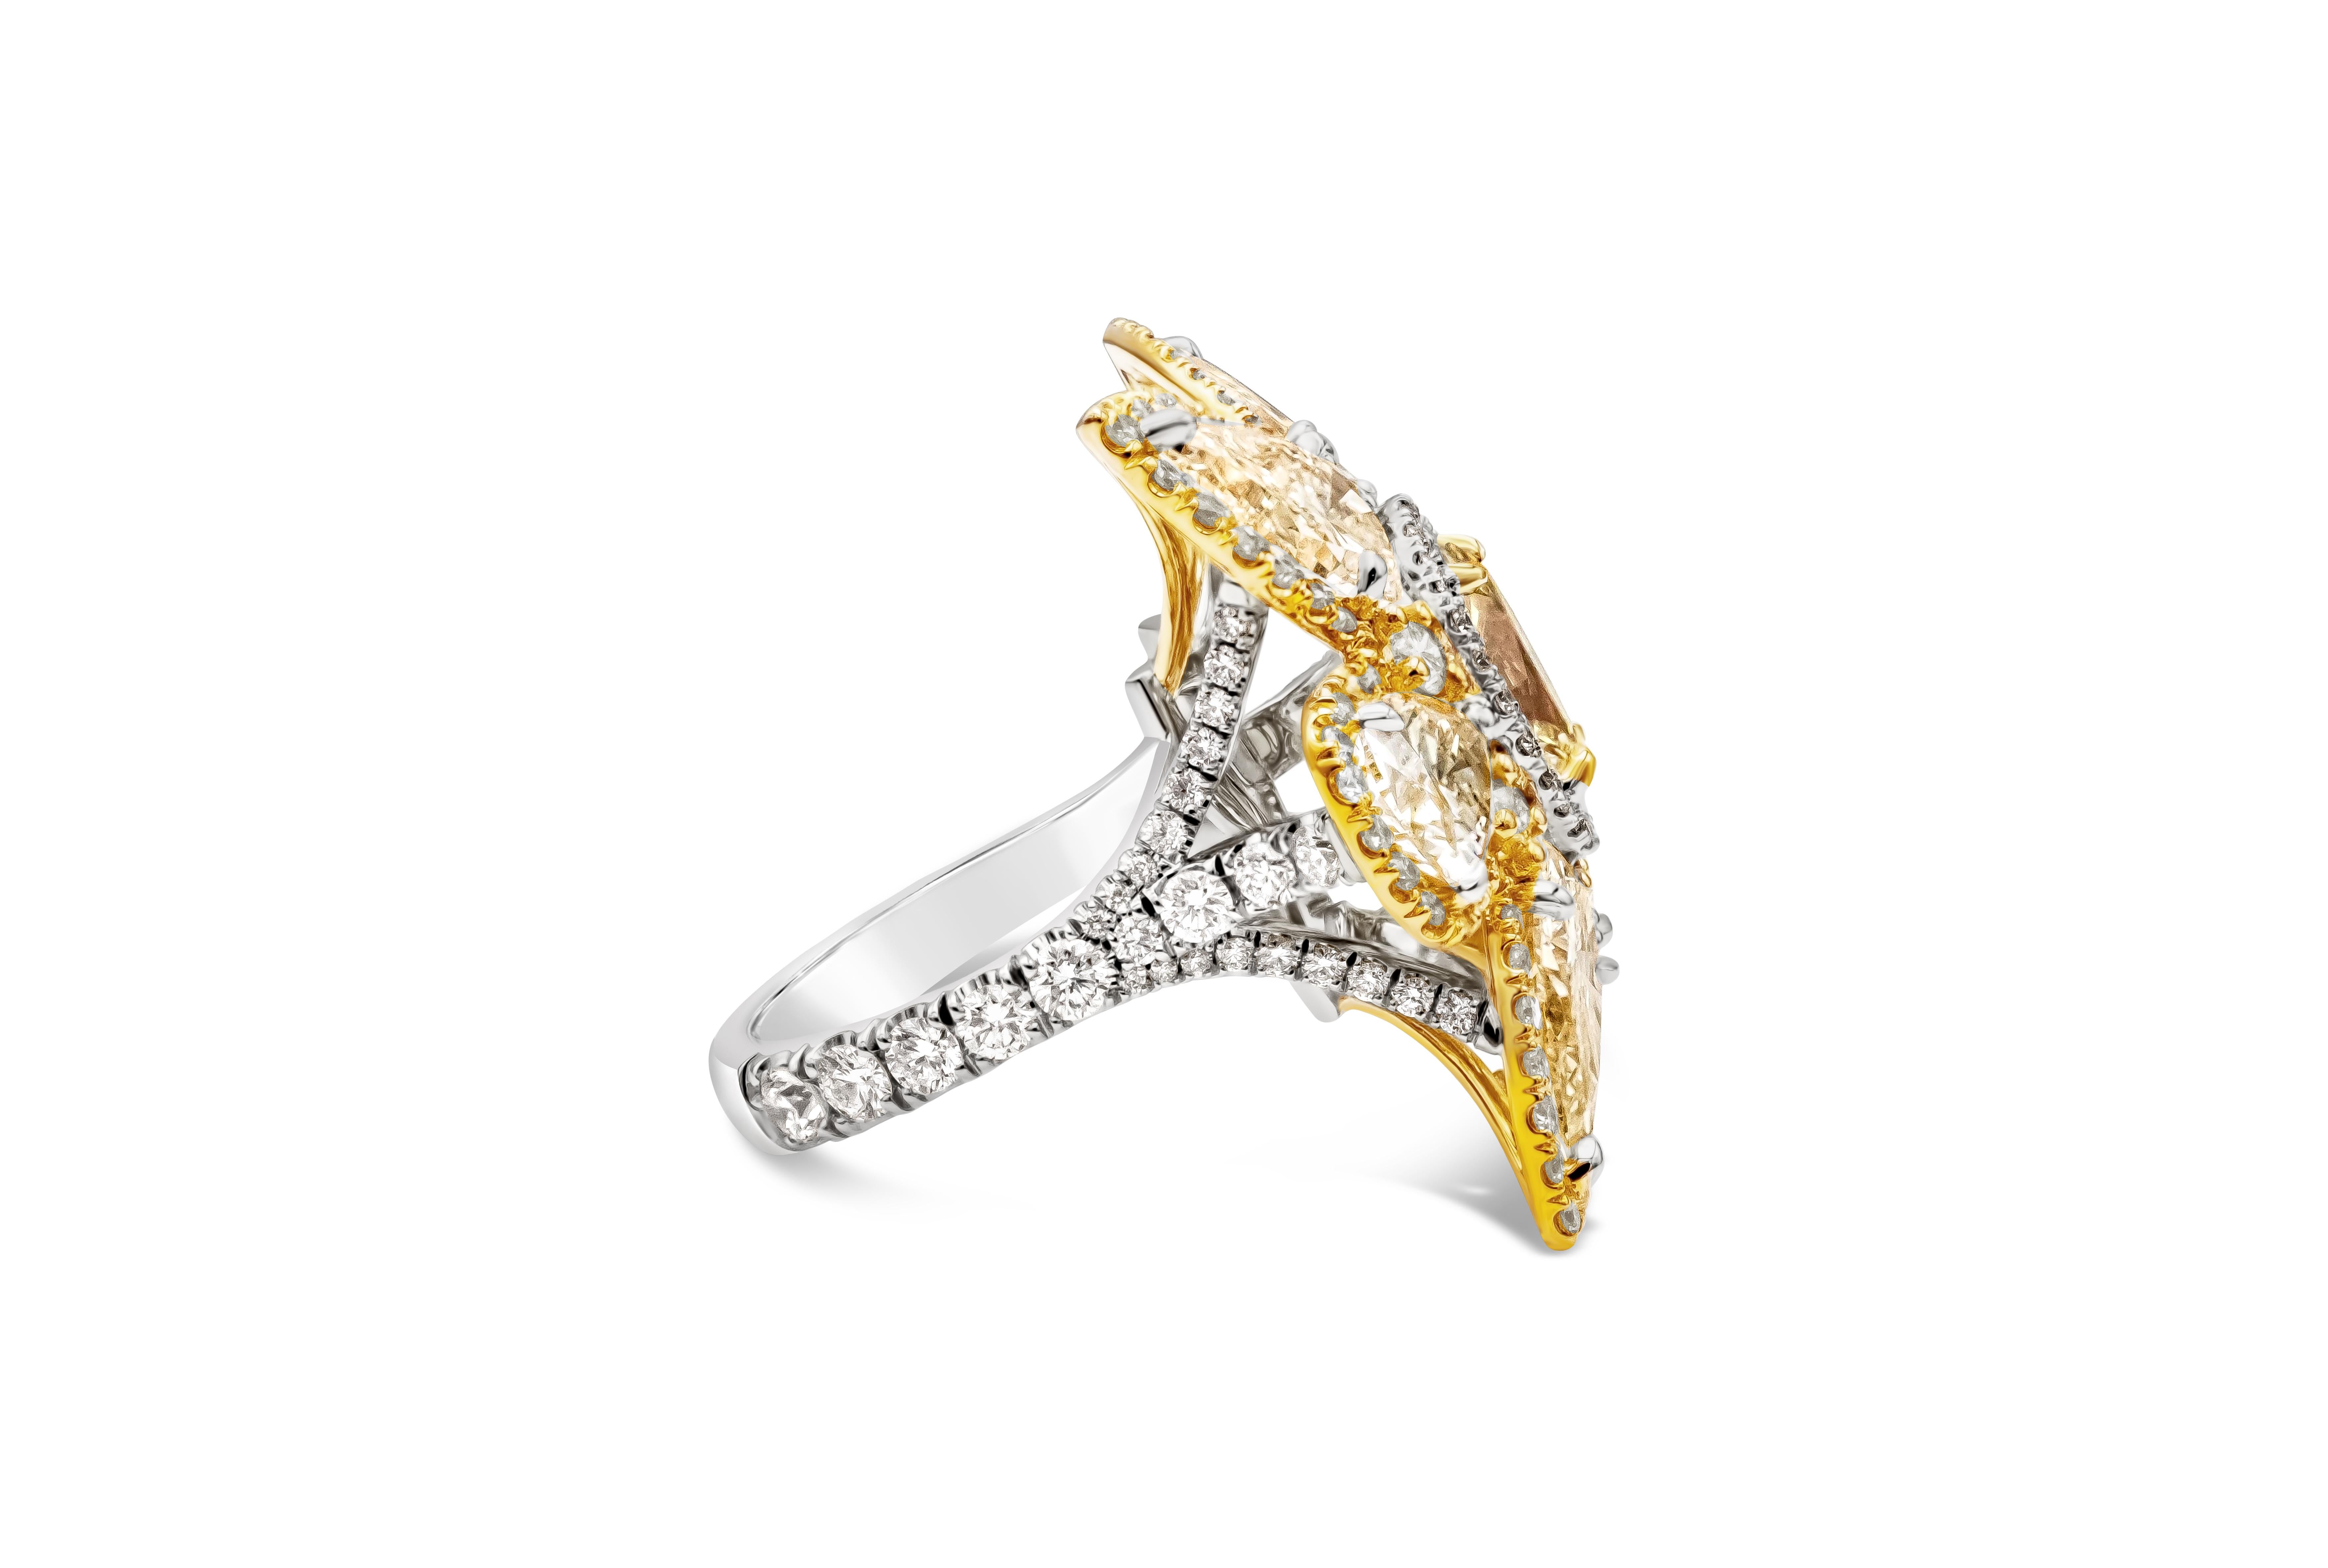 Contemporary Roman Malakov 11.15 Carat Total Mixed Cut Flower Design Diamond Cocktail Ring For Sale